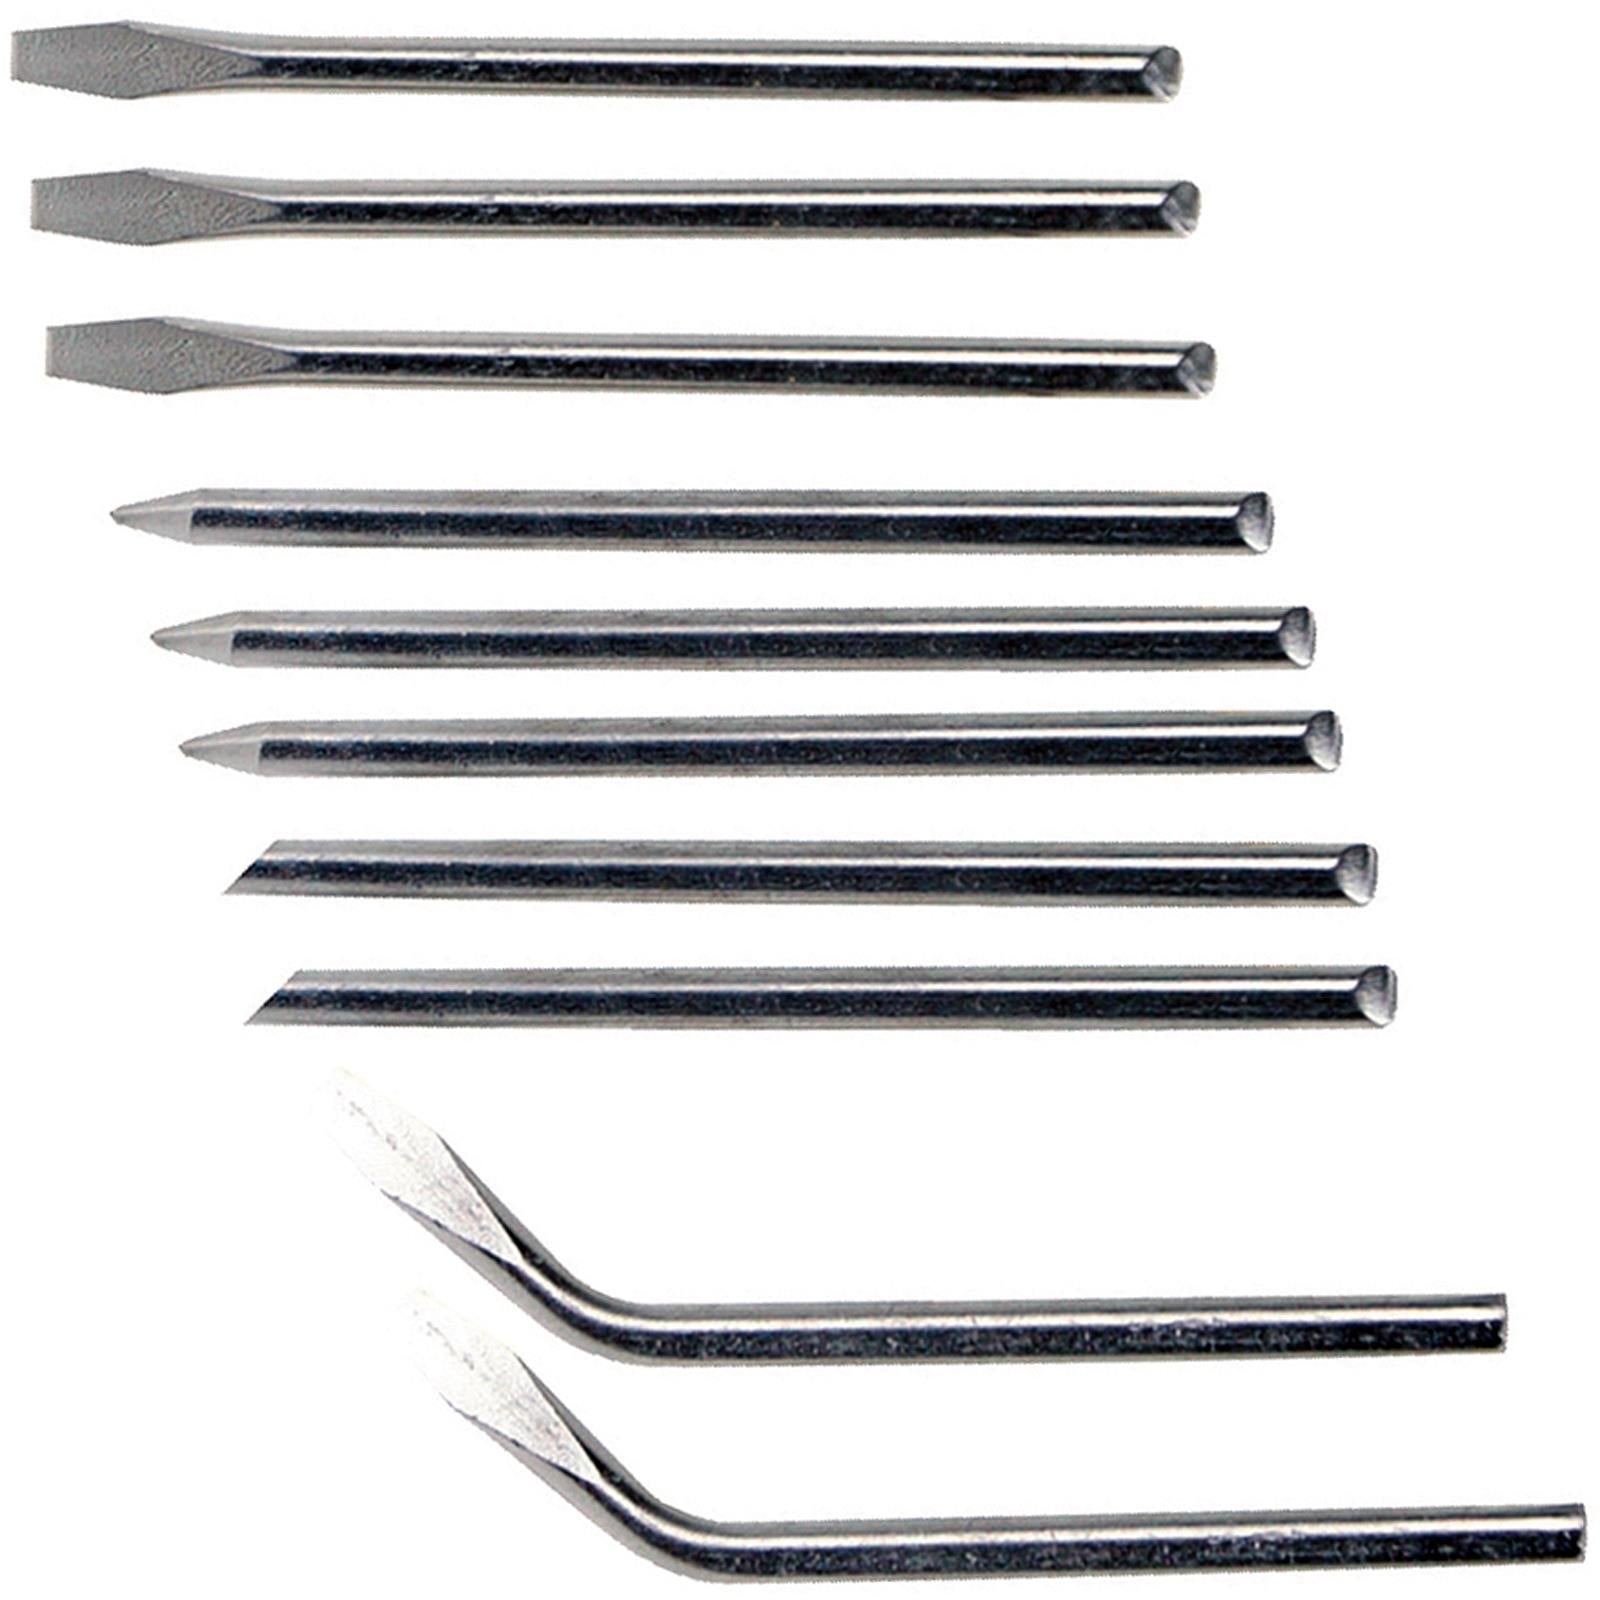 Silverline 10 Piece Soldering Iron Tips Set 15 & 25W Electronics Bent Pointed Chisel